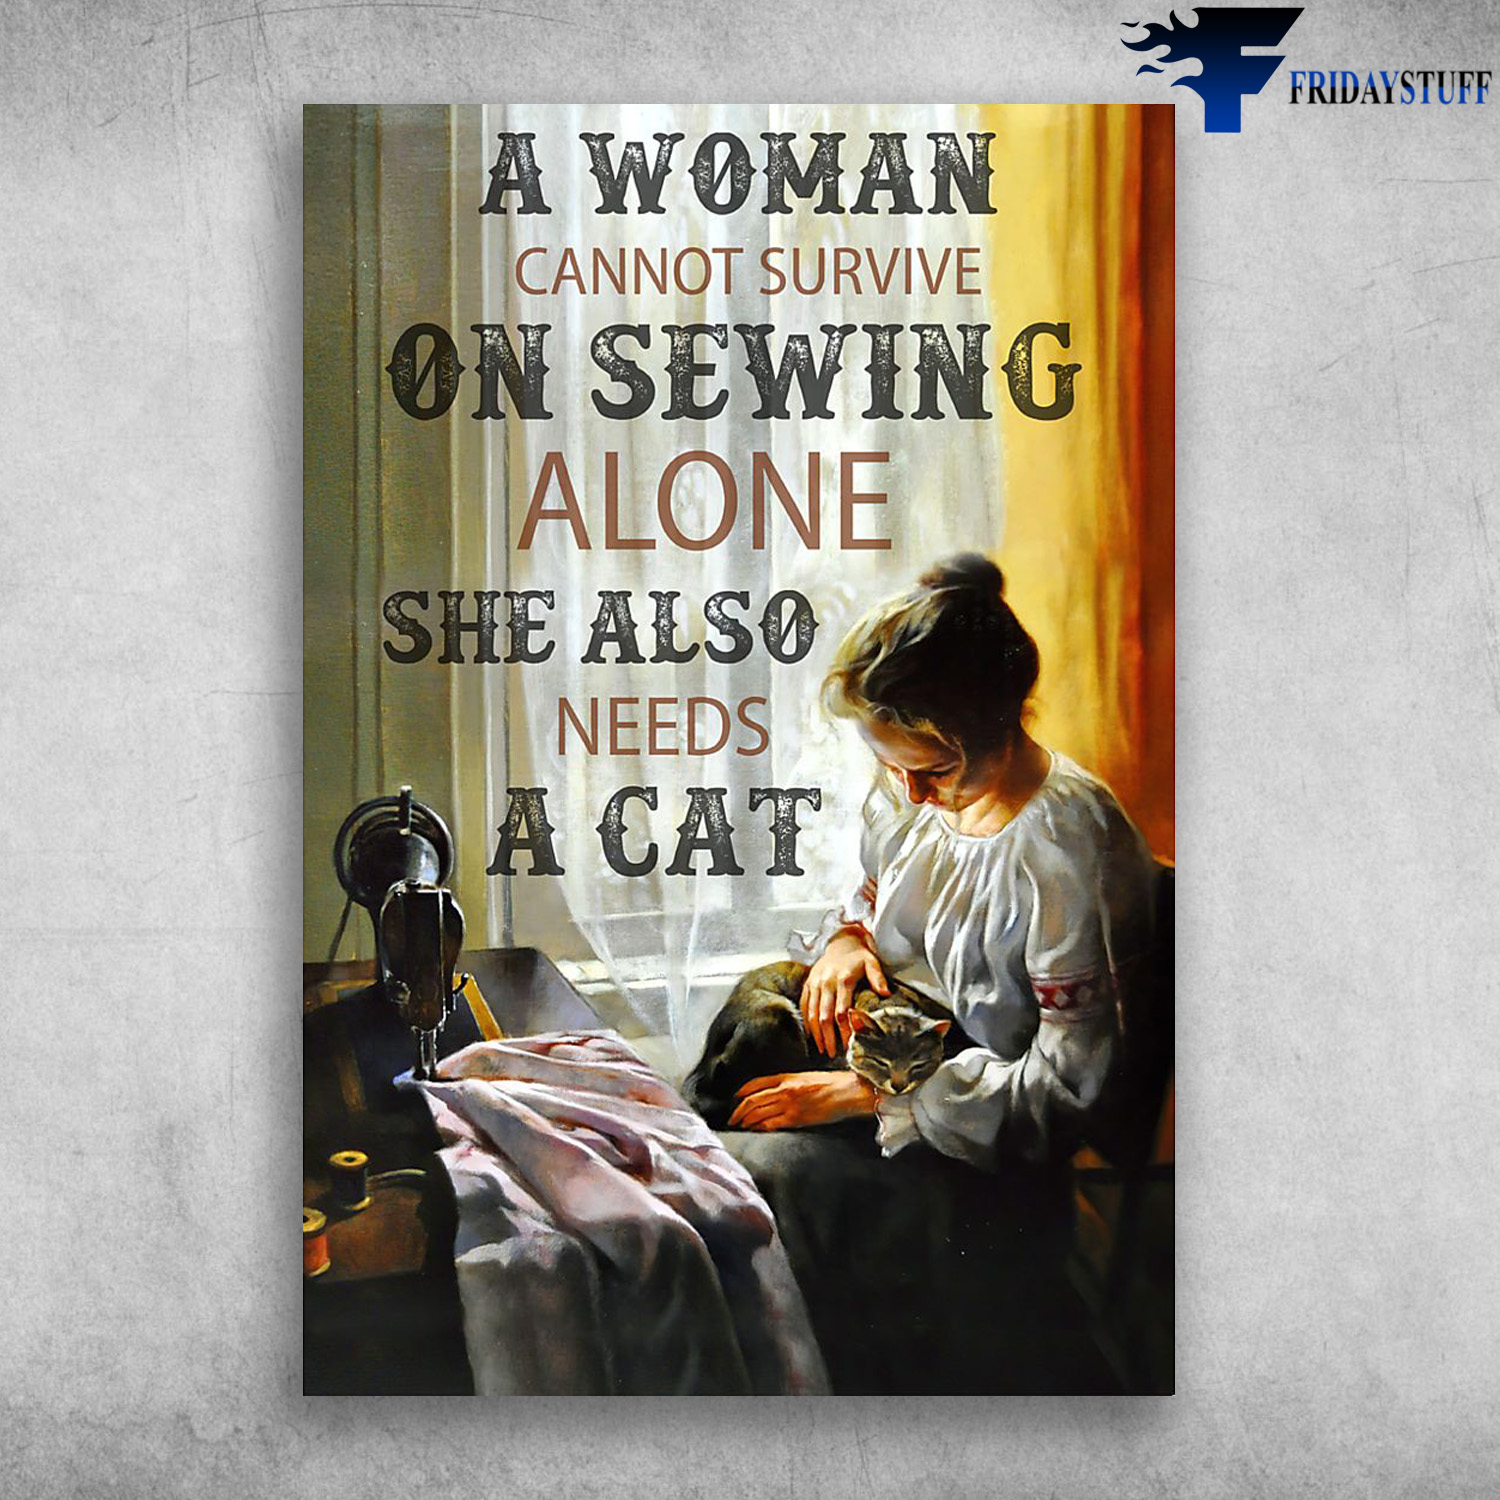 Girl Sewing With Cat - A Woman Cannot Rurvive, On Sewing A Lone, She Also Needs A Cat